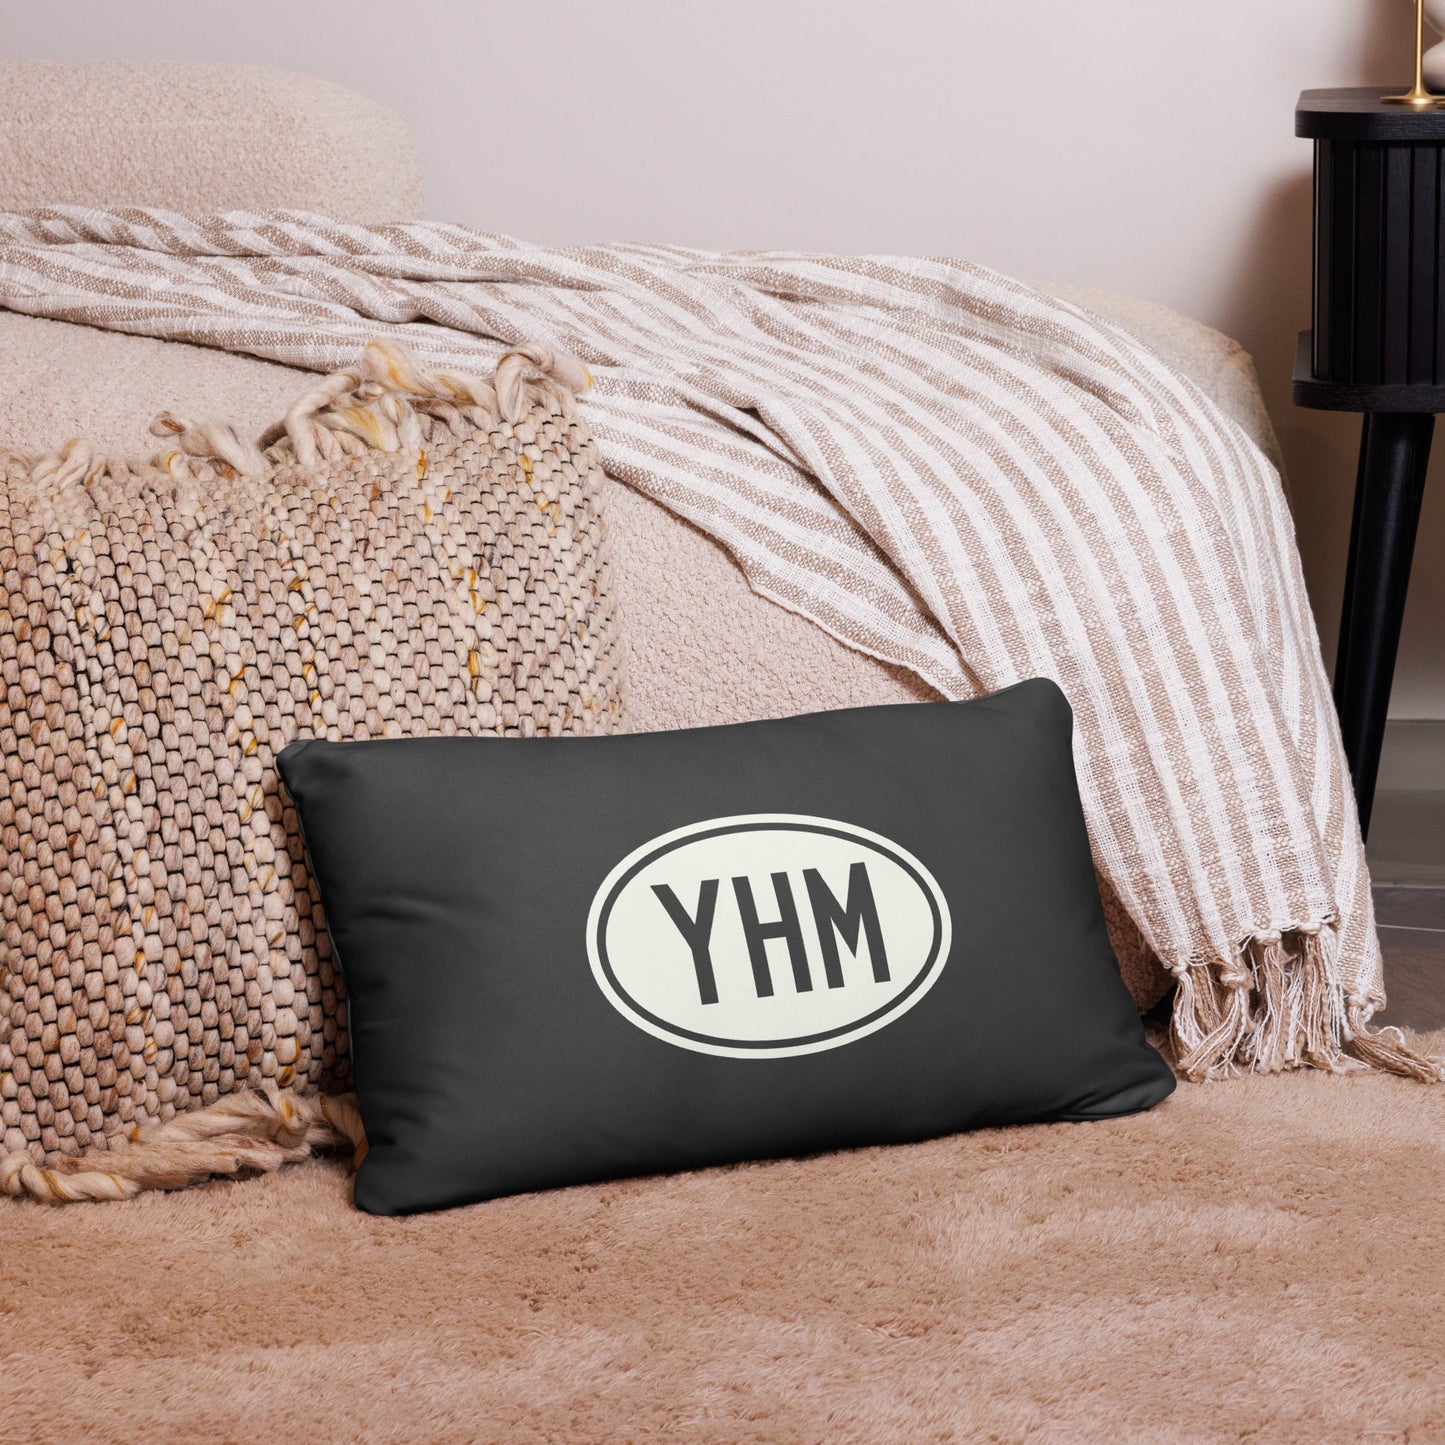 Unique Travel Gift Throw Pillow - White Oval • YQB Quebec City • YHM Designs - Image 05